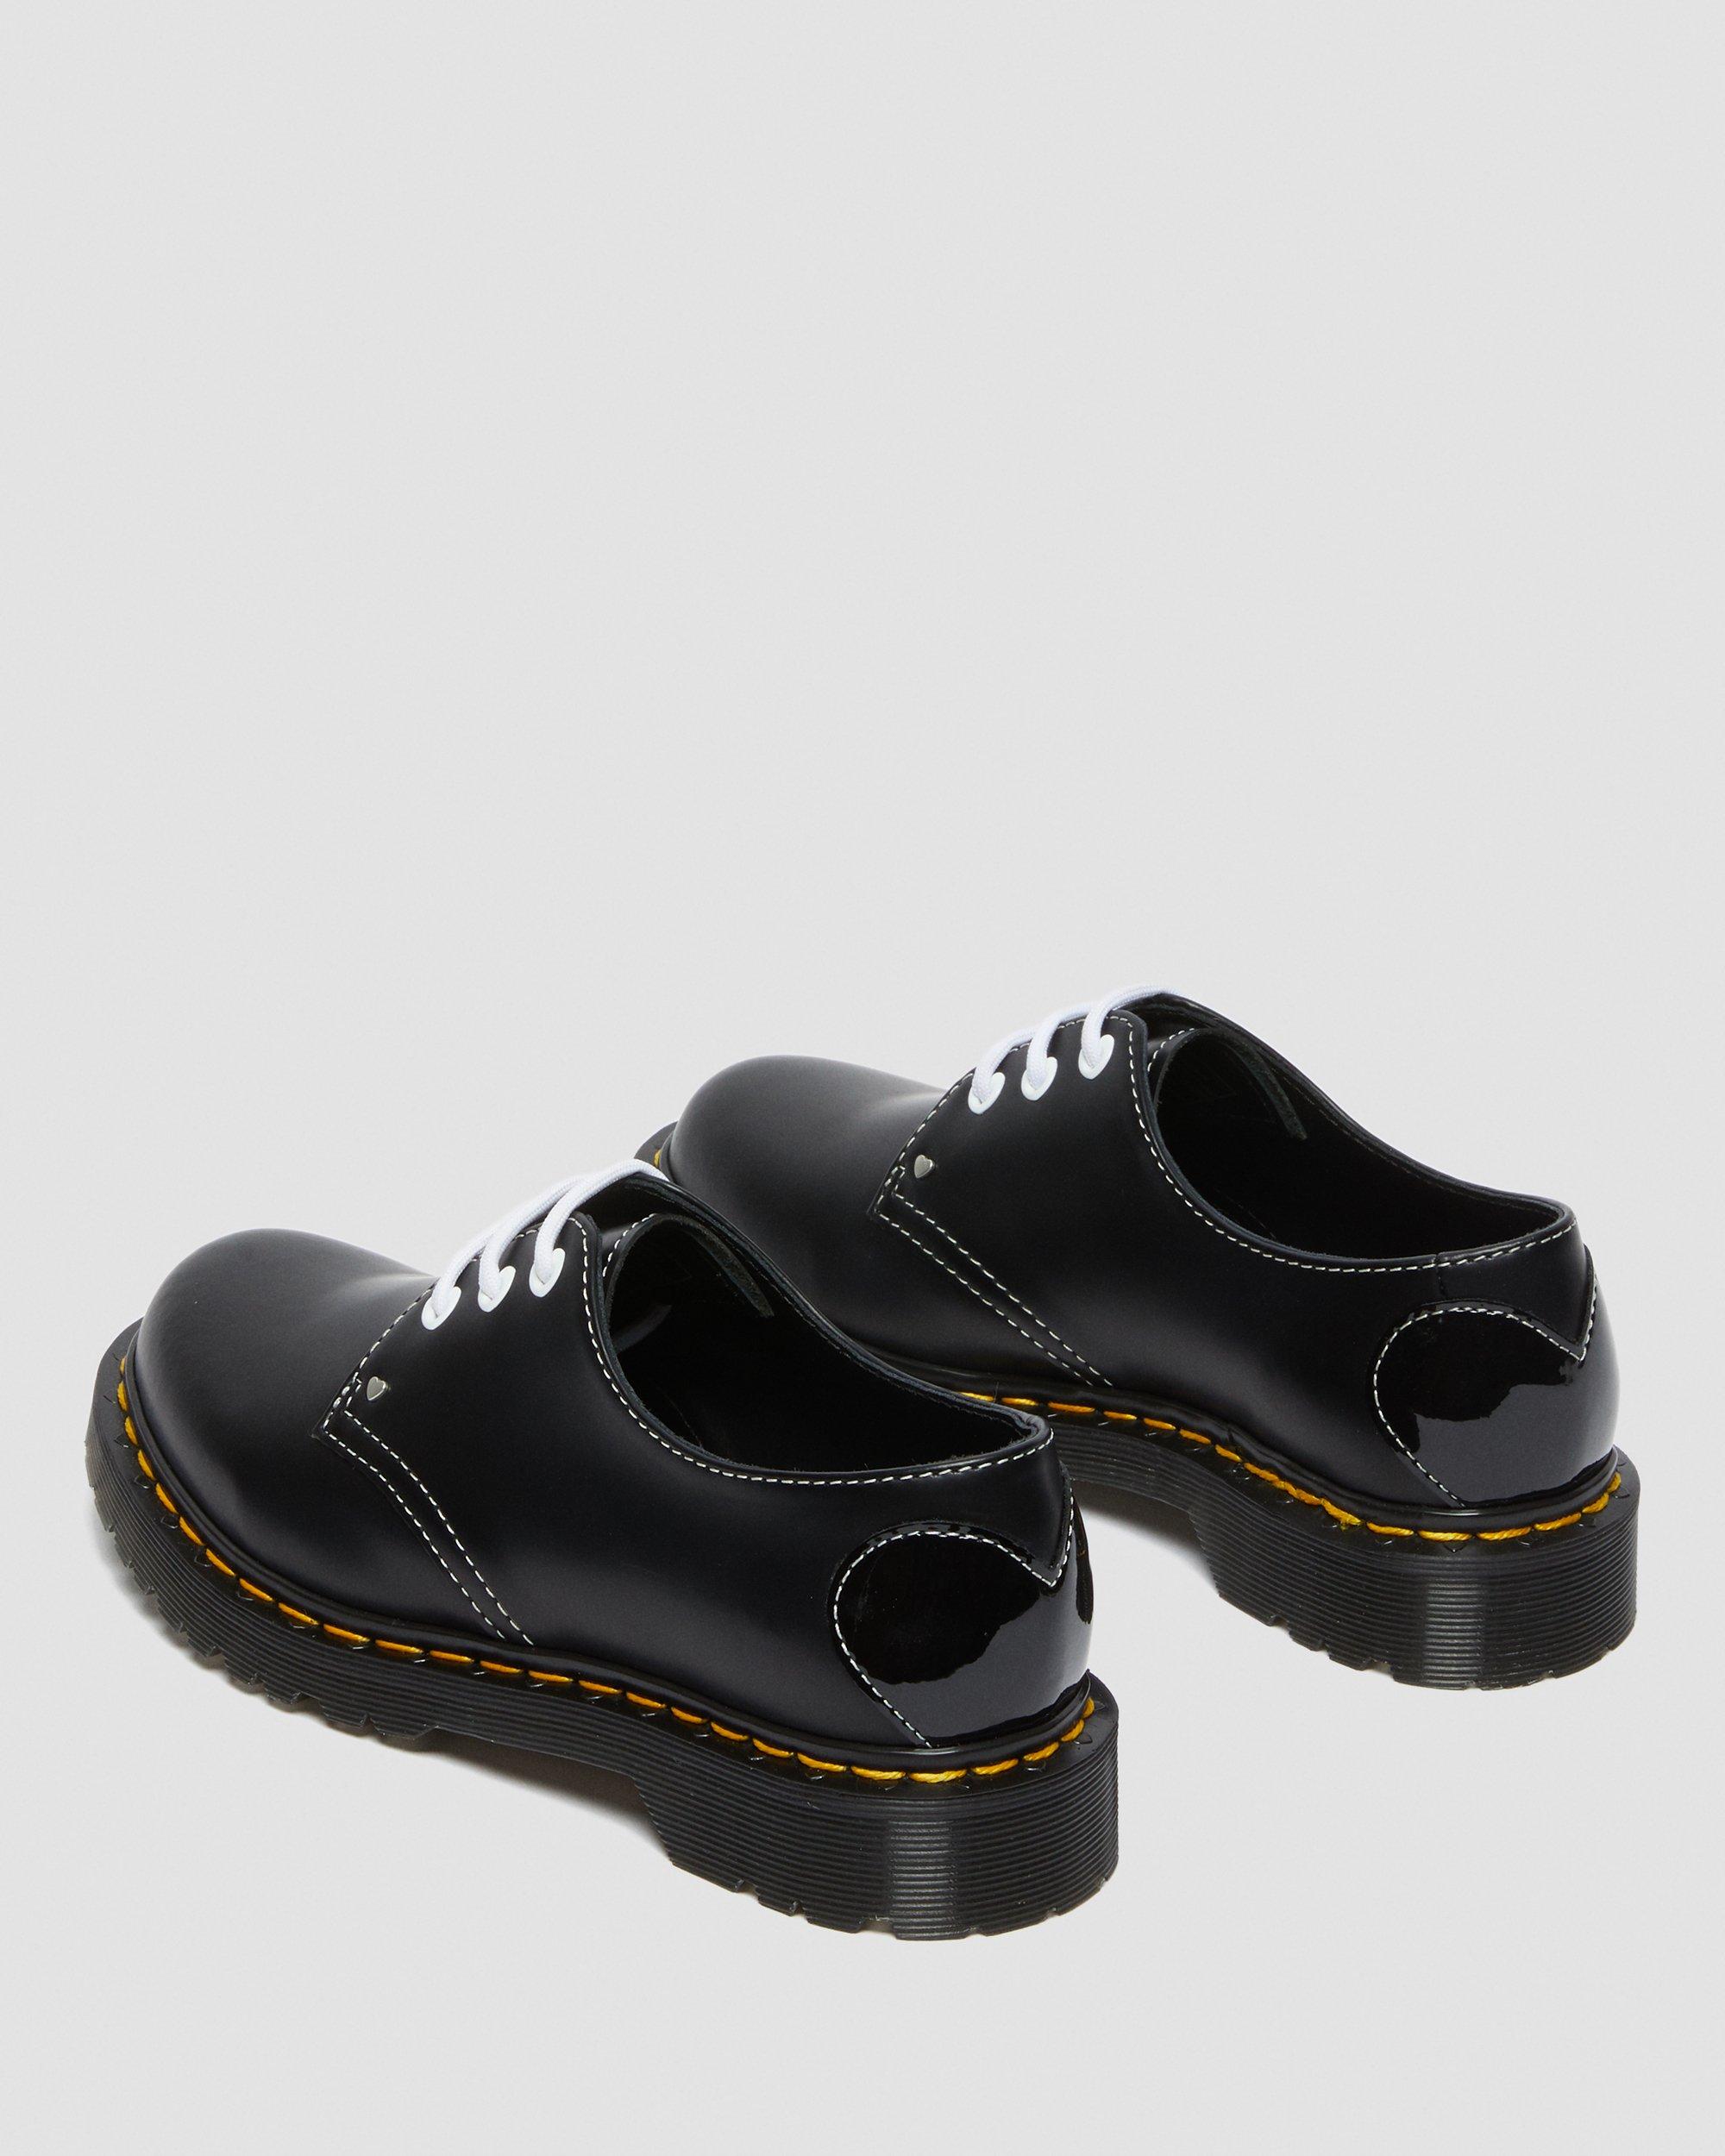 1461 Hearts Smooth & Patent Leather Oxford Shoes in Black | Dr